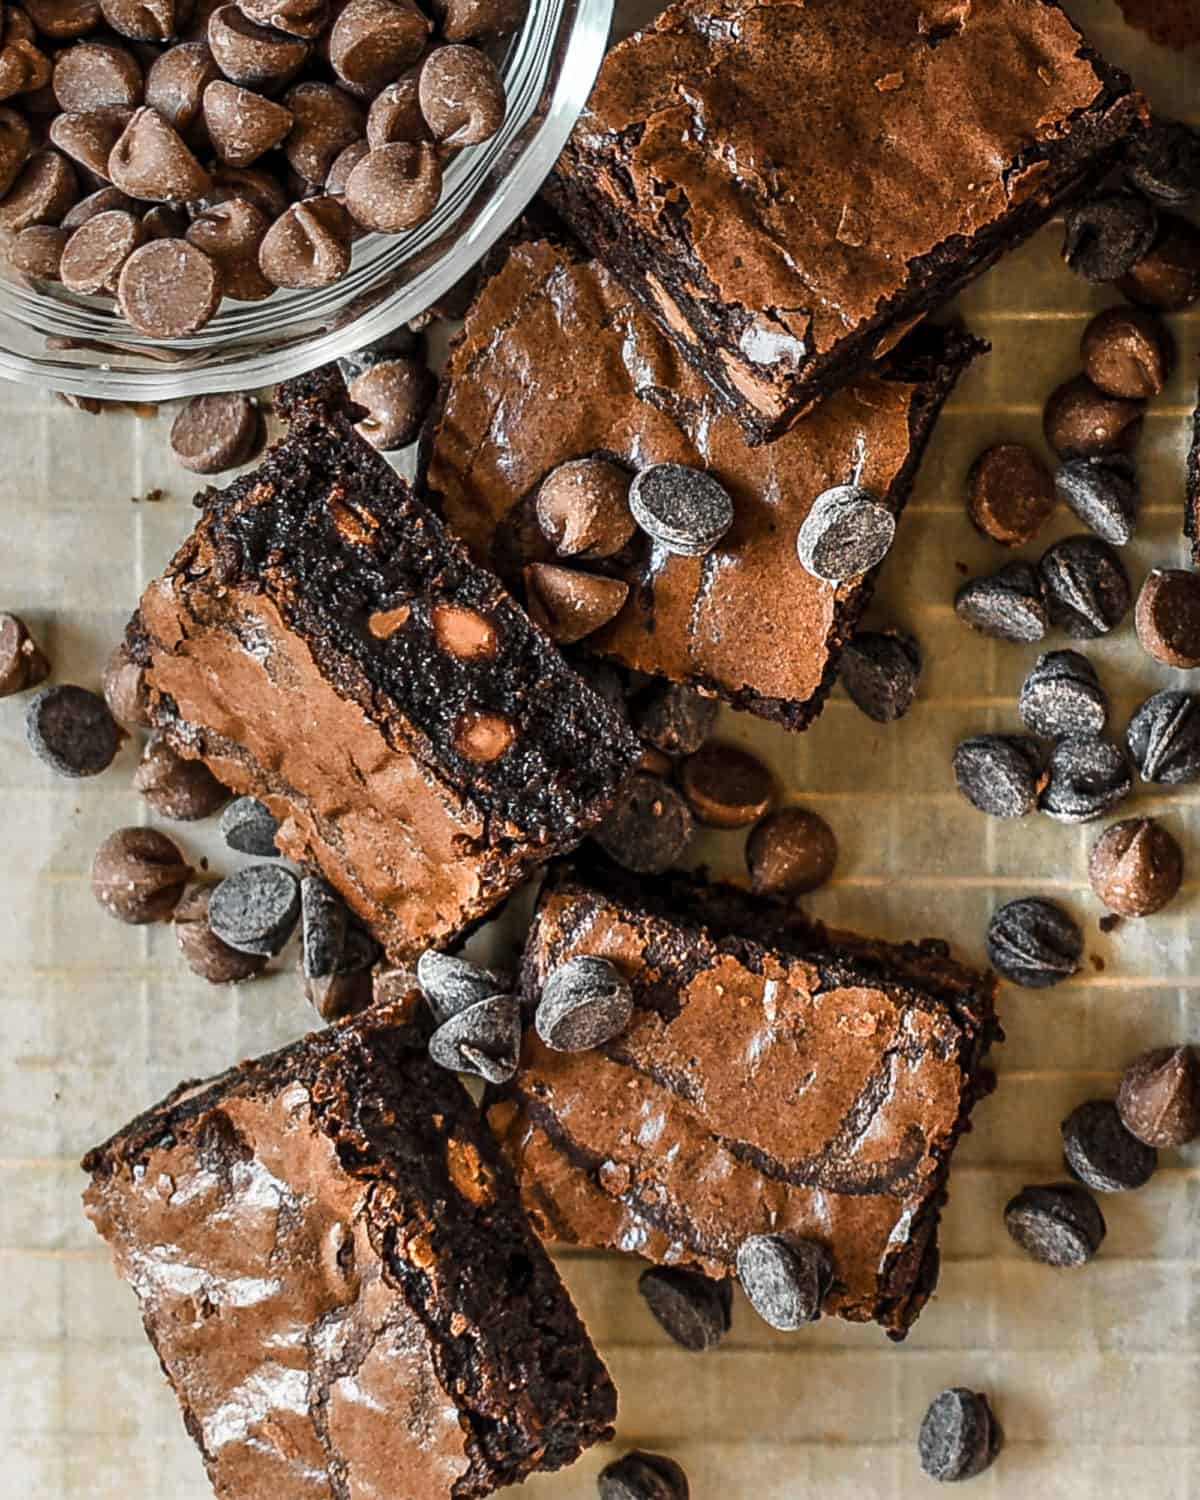 A pile of brownies and chocolate chips on a table.